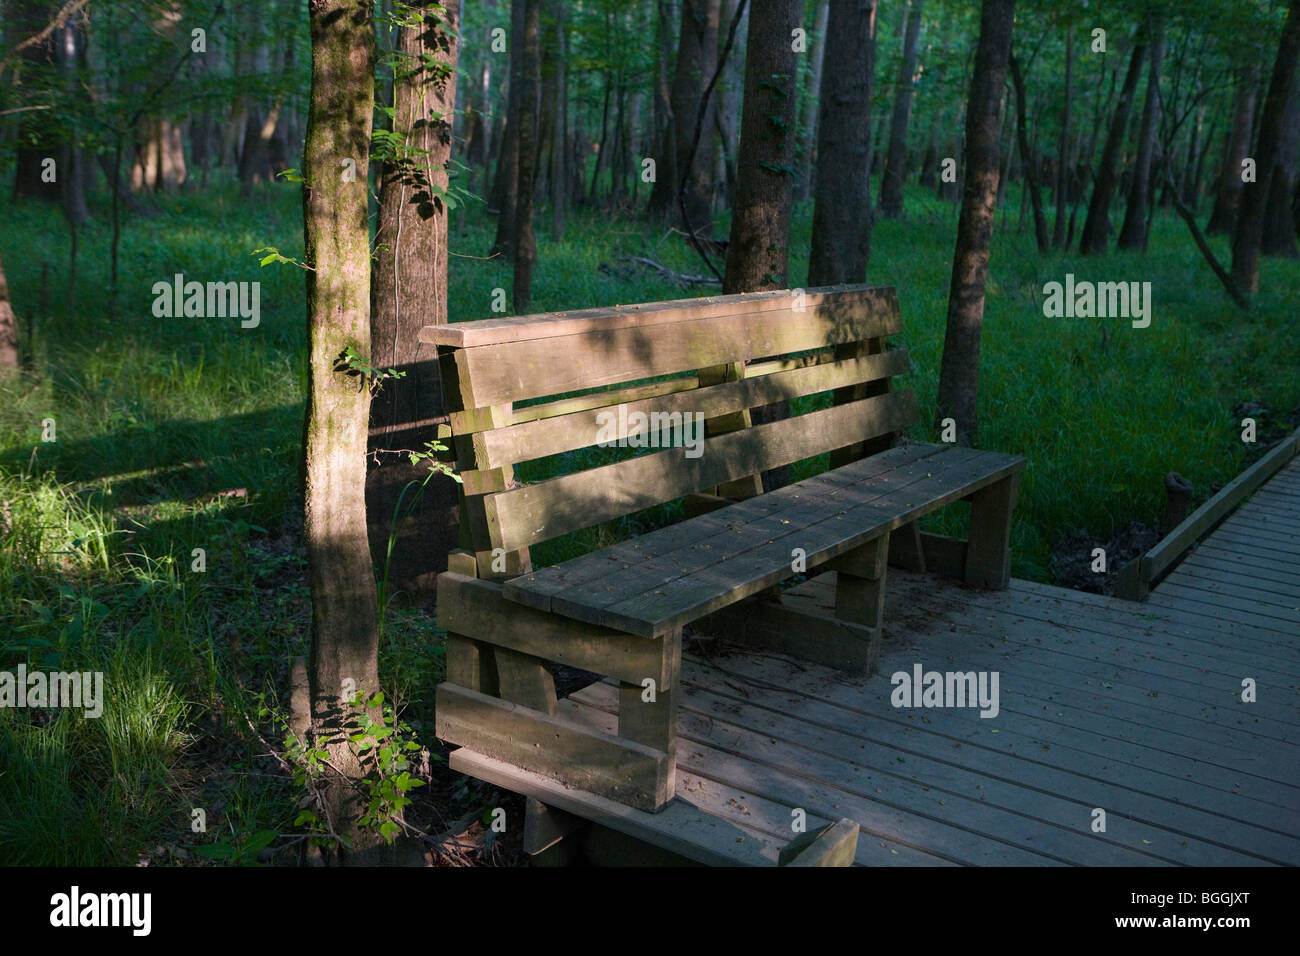 Bench illuminated by sunlight on boardwalk next to forest trees, Congaree National Park, near Columbia, South Carolina. Stock Photo